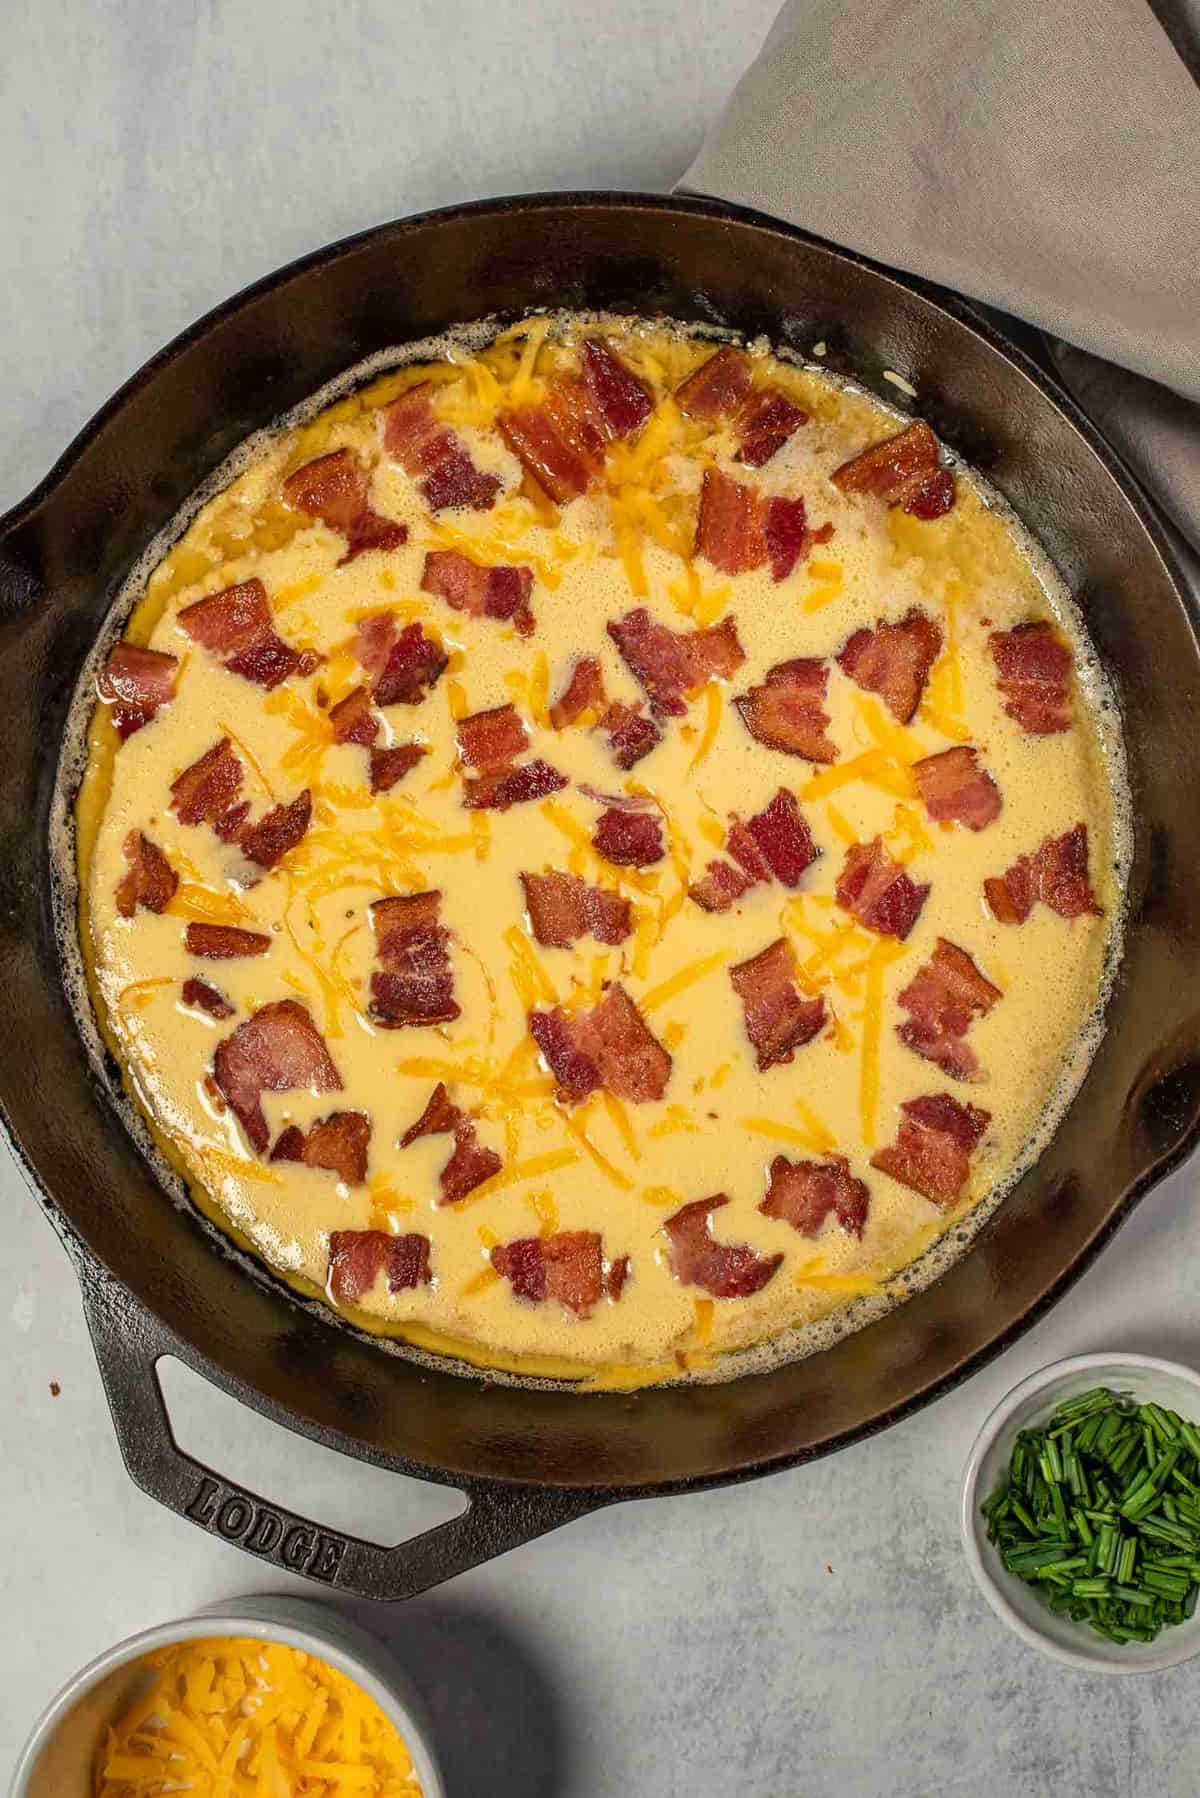 Uncooked dutch baby with bacon and cheeese.